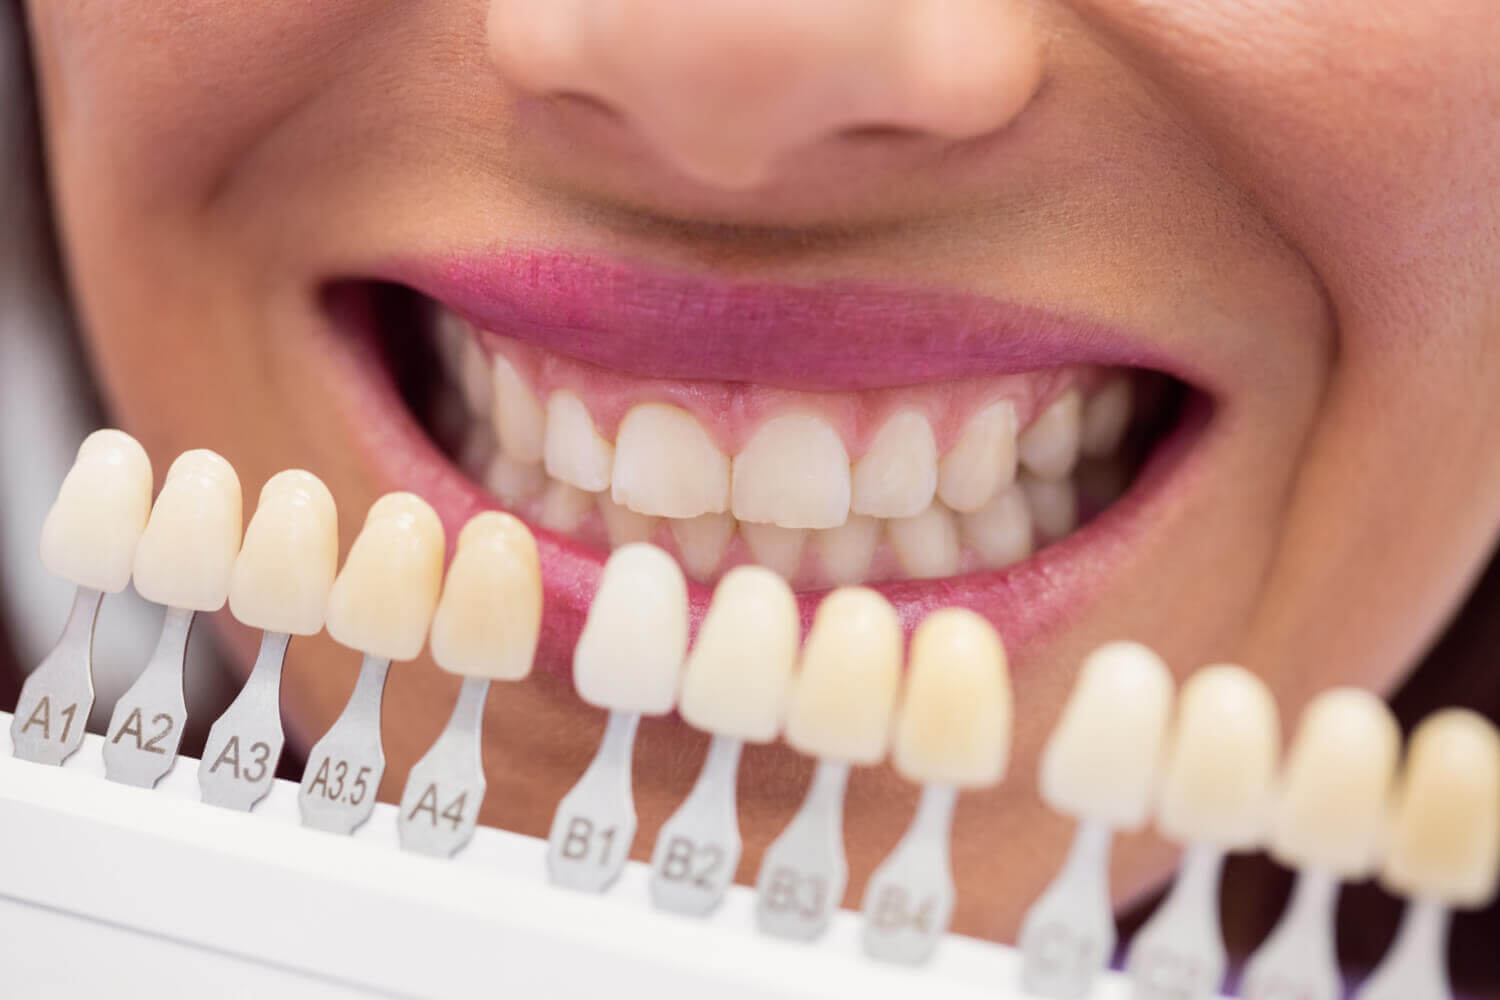 A dentist using a shade guide to select the perfect tooth color for a dental procedure.